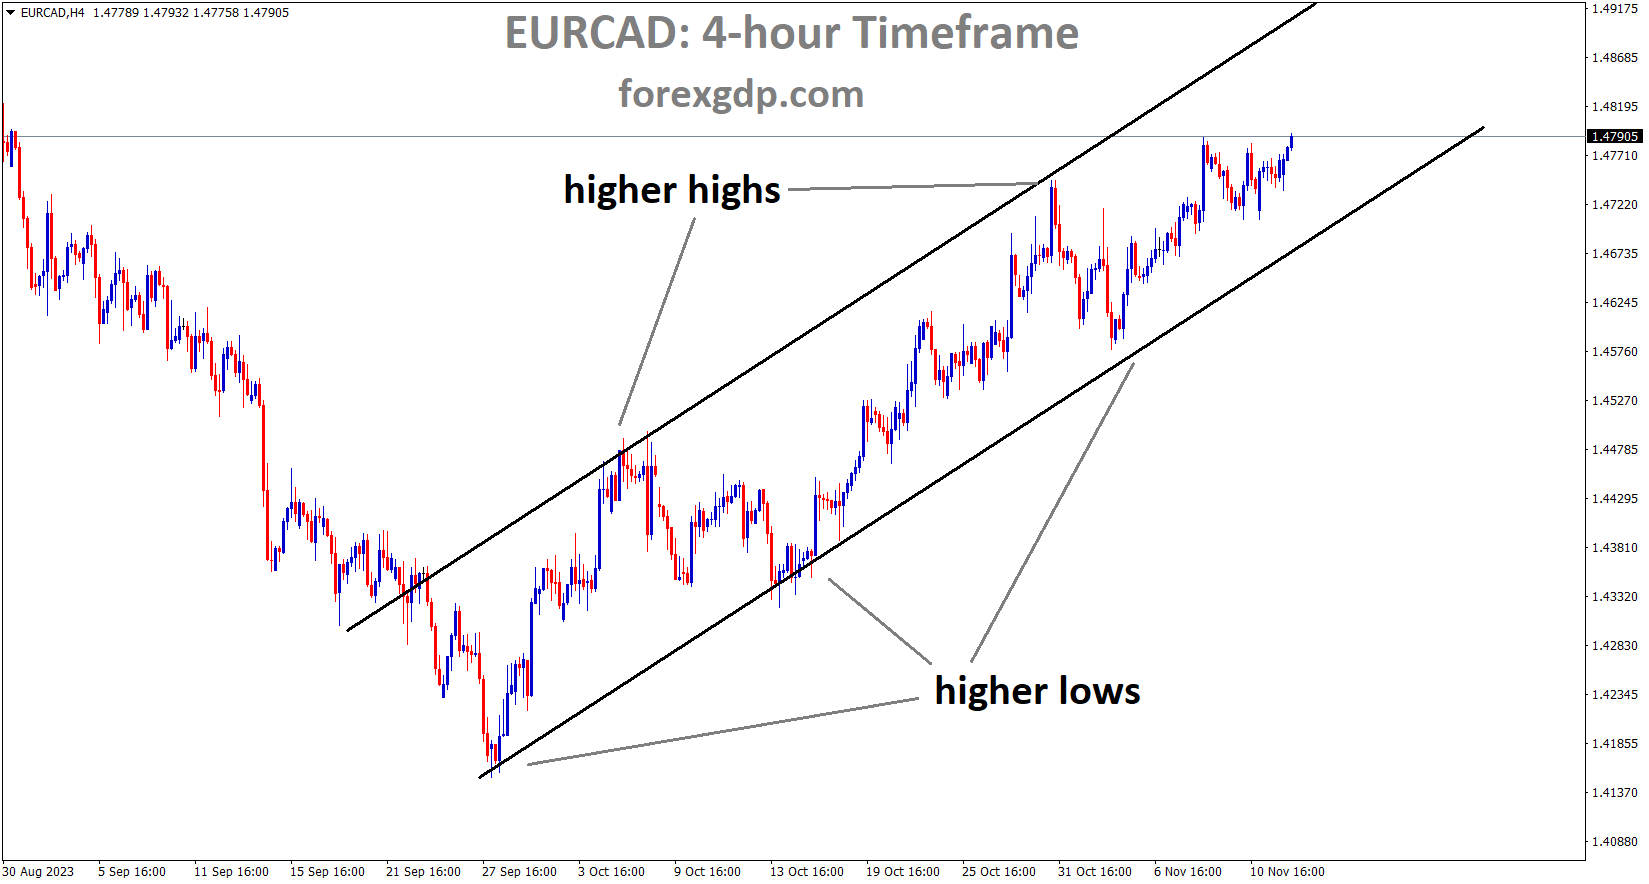 EURCAD is moving in an Ascending channel and the market has rebounded from the higher low area of the channel